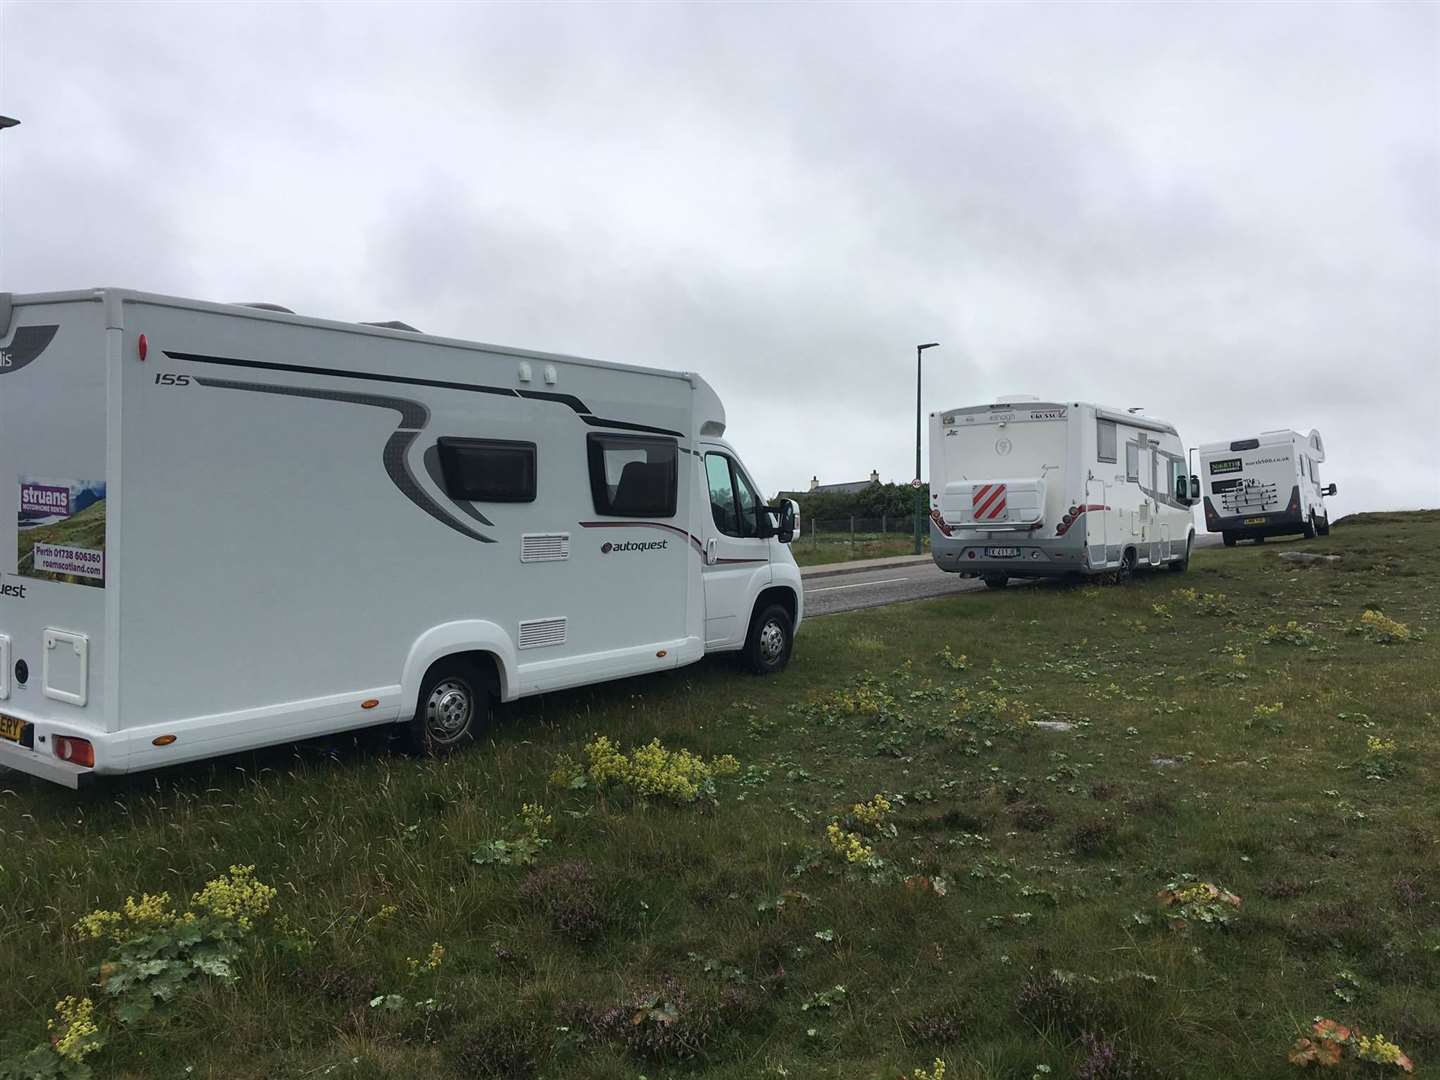 Motorhomes parked up on verges near Durness in 2020.